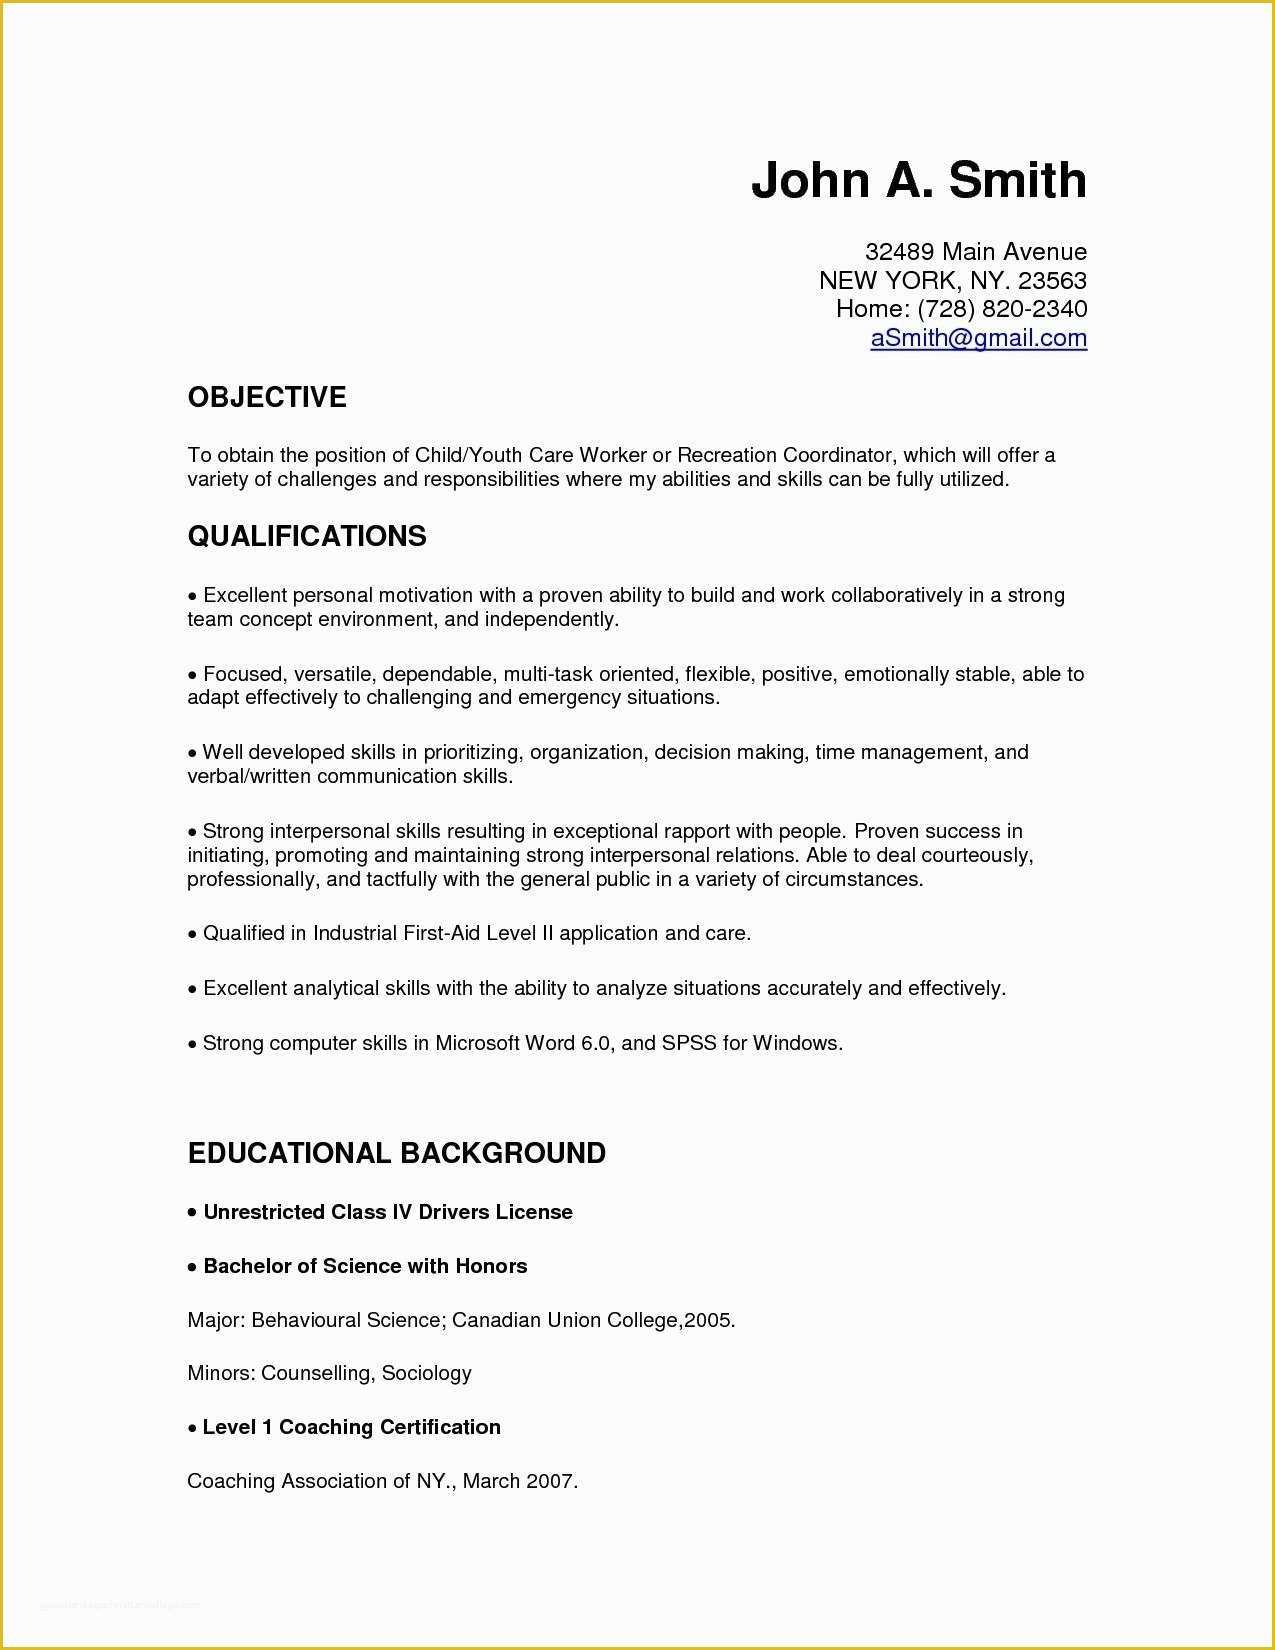 Free Pretty Resume Templates Of Resume Template Free Download Perfect Impressive Resume